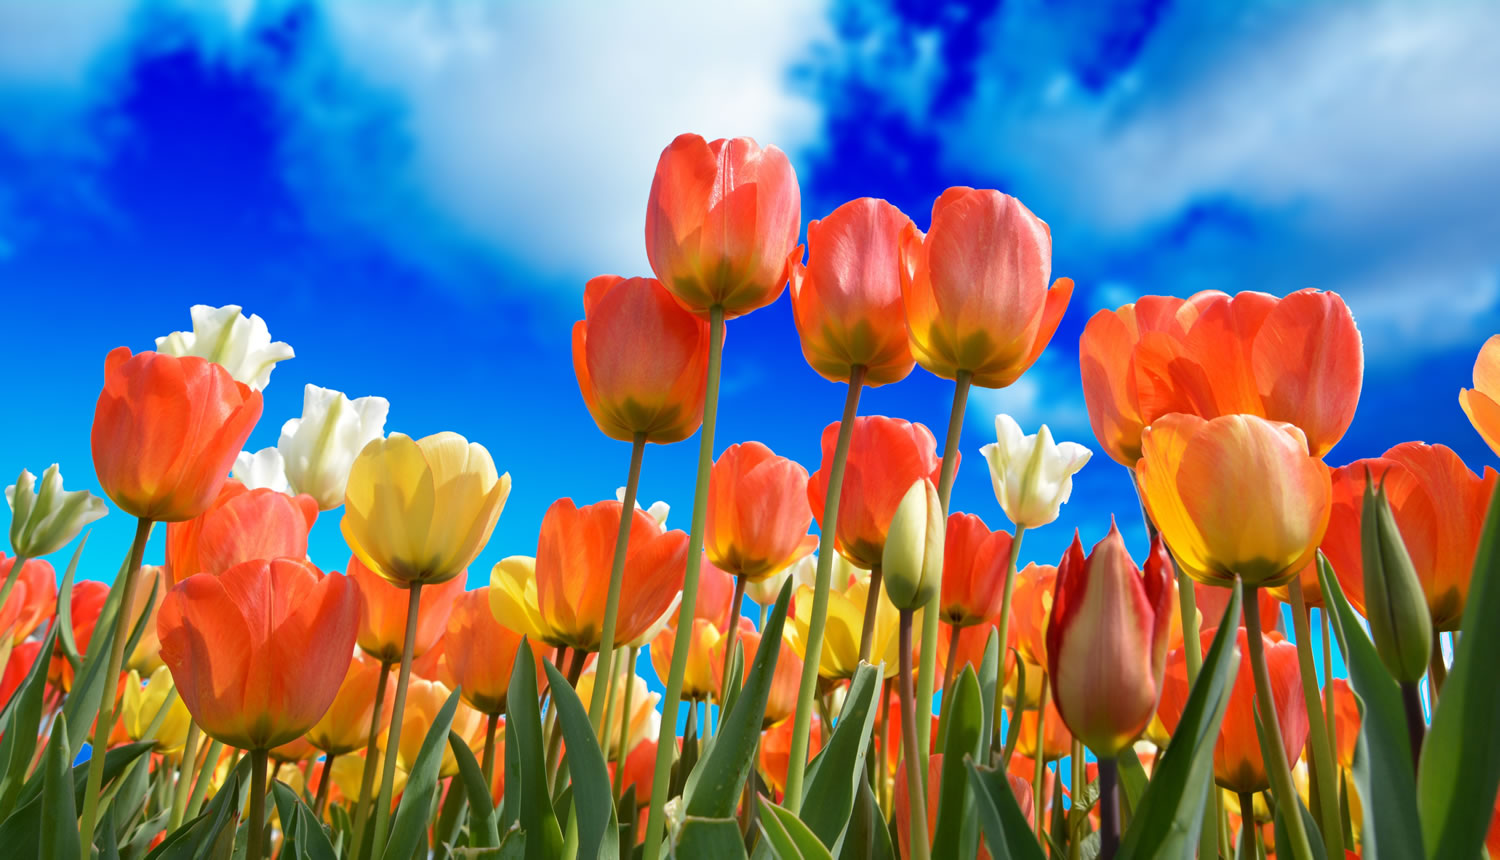 Tulips And Blue Sky Wallpaper Mural                   